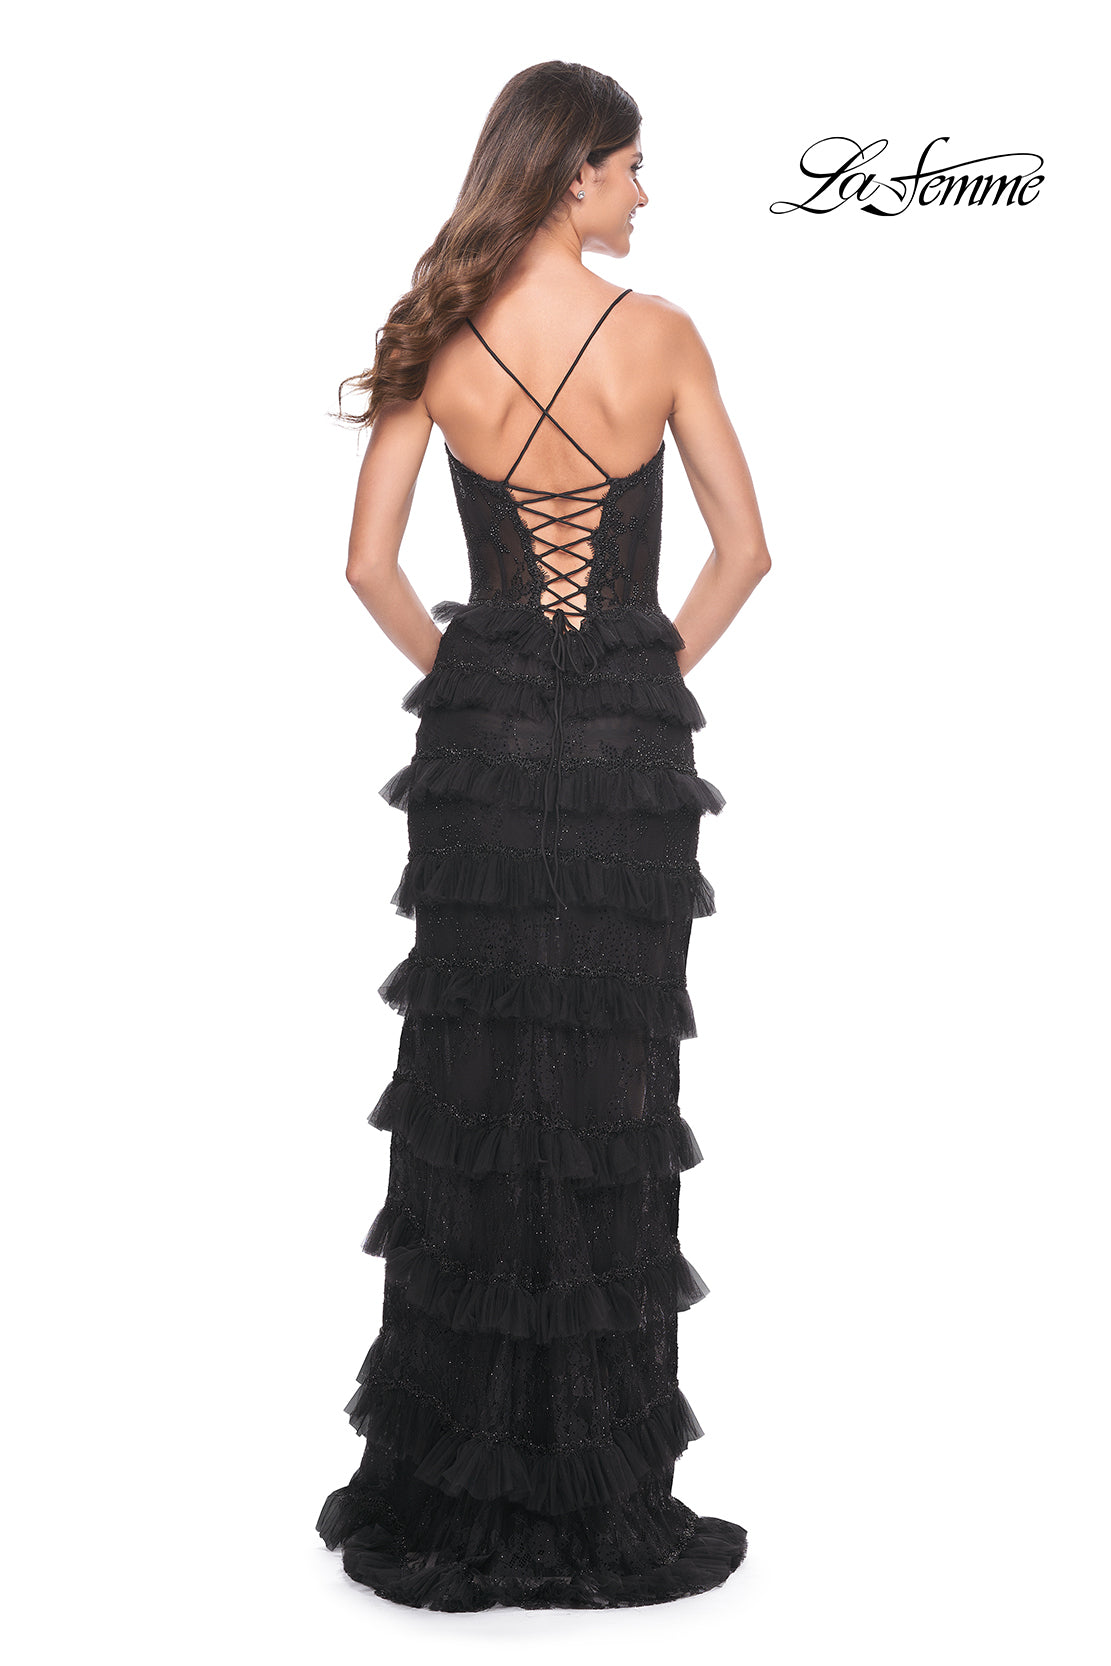 La-Femme-32113-Sweetheart-Neckline-Lace-up-Back-High-Slit-Hot-Stone-Lace-Fitted-Black-Evening-Dress-B-Chic-Fashions-Prom-Dress